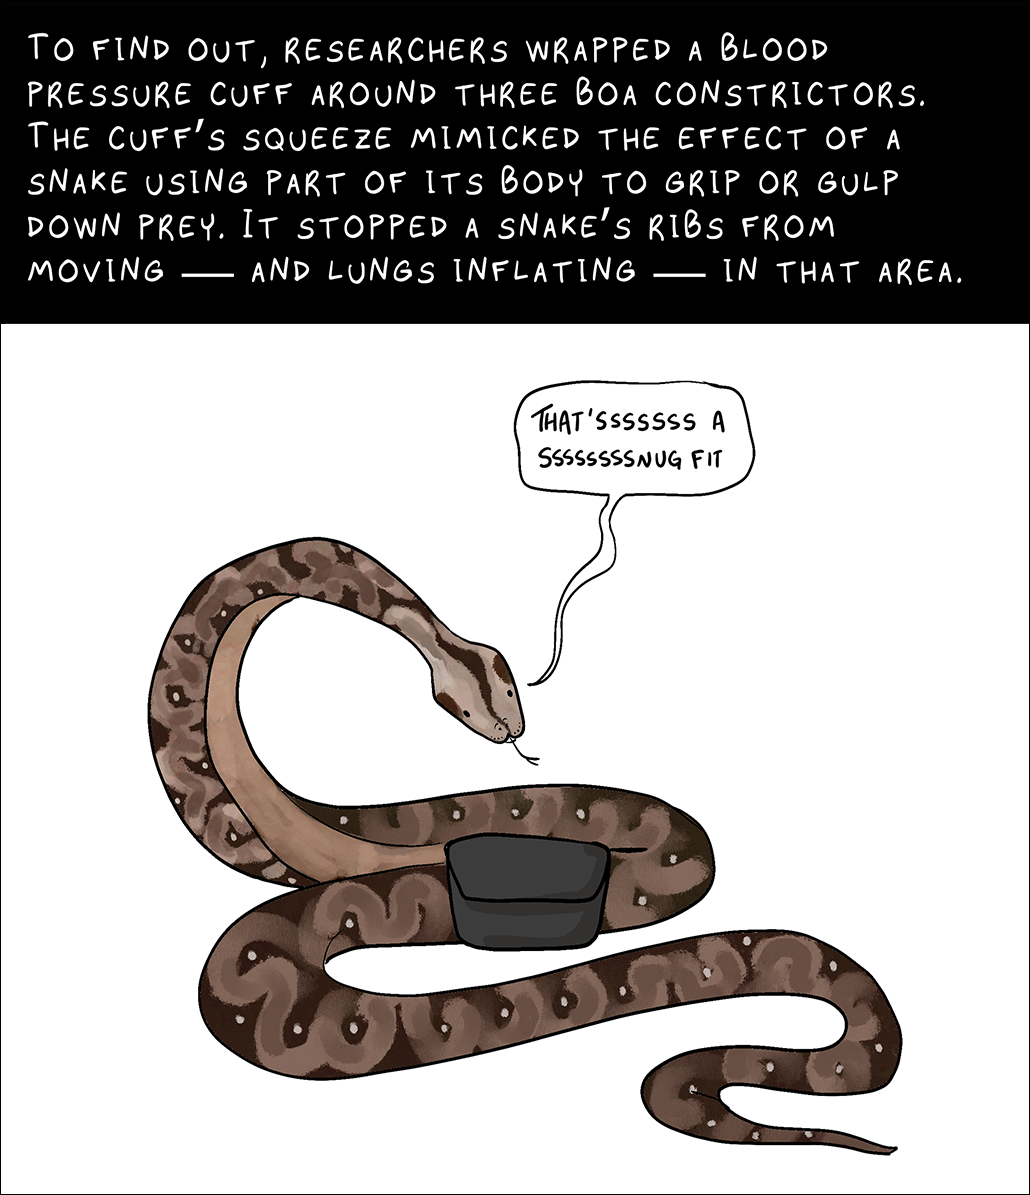 Panel 3. Text at top: To find out, researchers wrapped a blood pressure cuff around three boa constrictors. The cuff's squeeze mimicked the effect of a snake using part of its body to grip or gulp down prey. It stopped a snake's ribs from moving - and lungs inflating - in that area. Image: Boa constrictor with a blood pressure cuff. The snake says 'That'ssssss a sssssssnug fit'